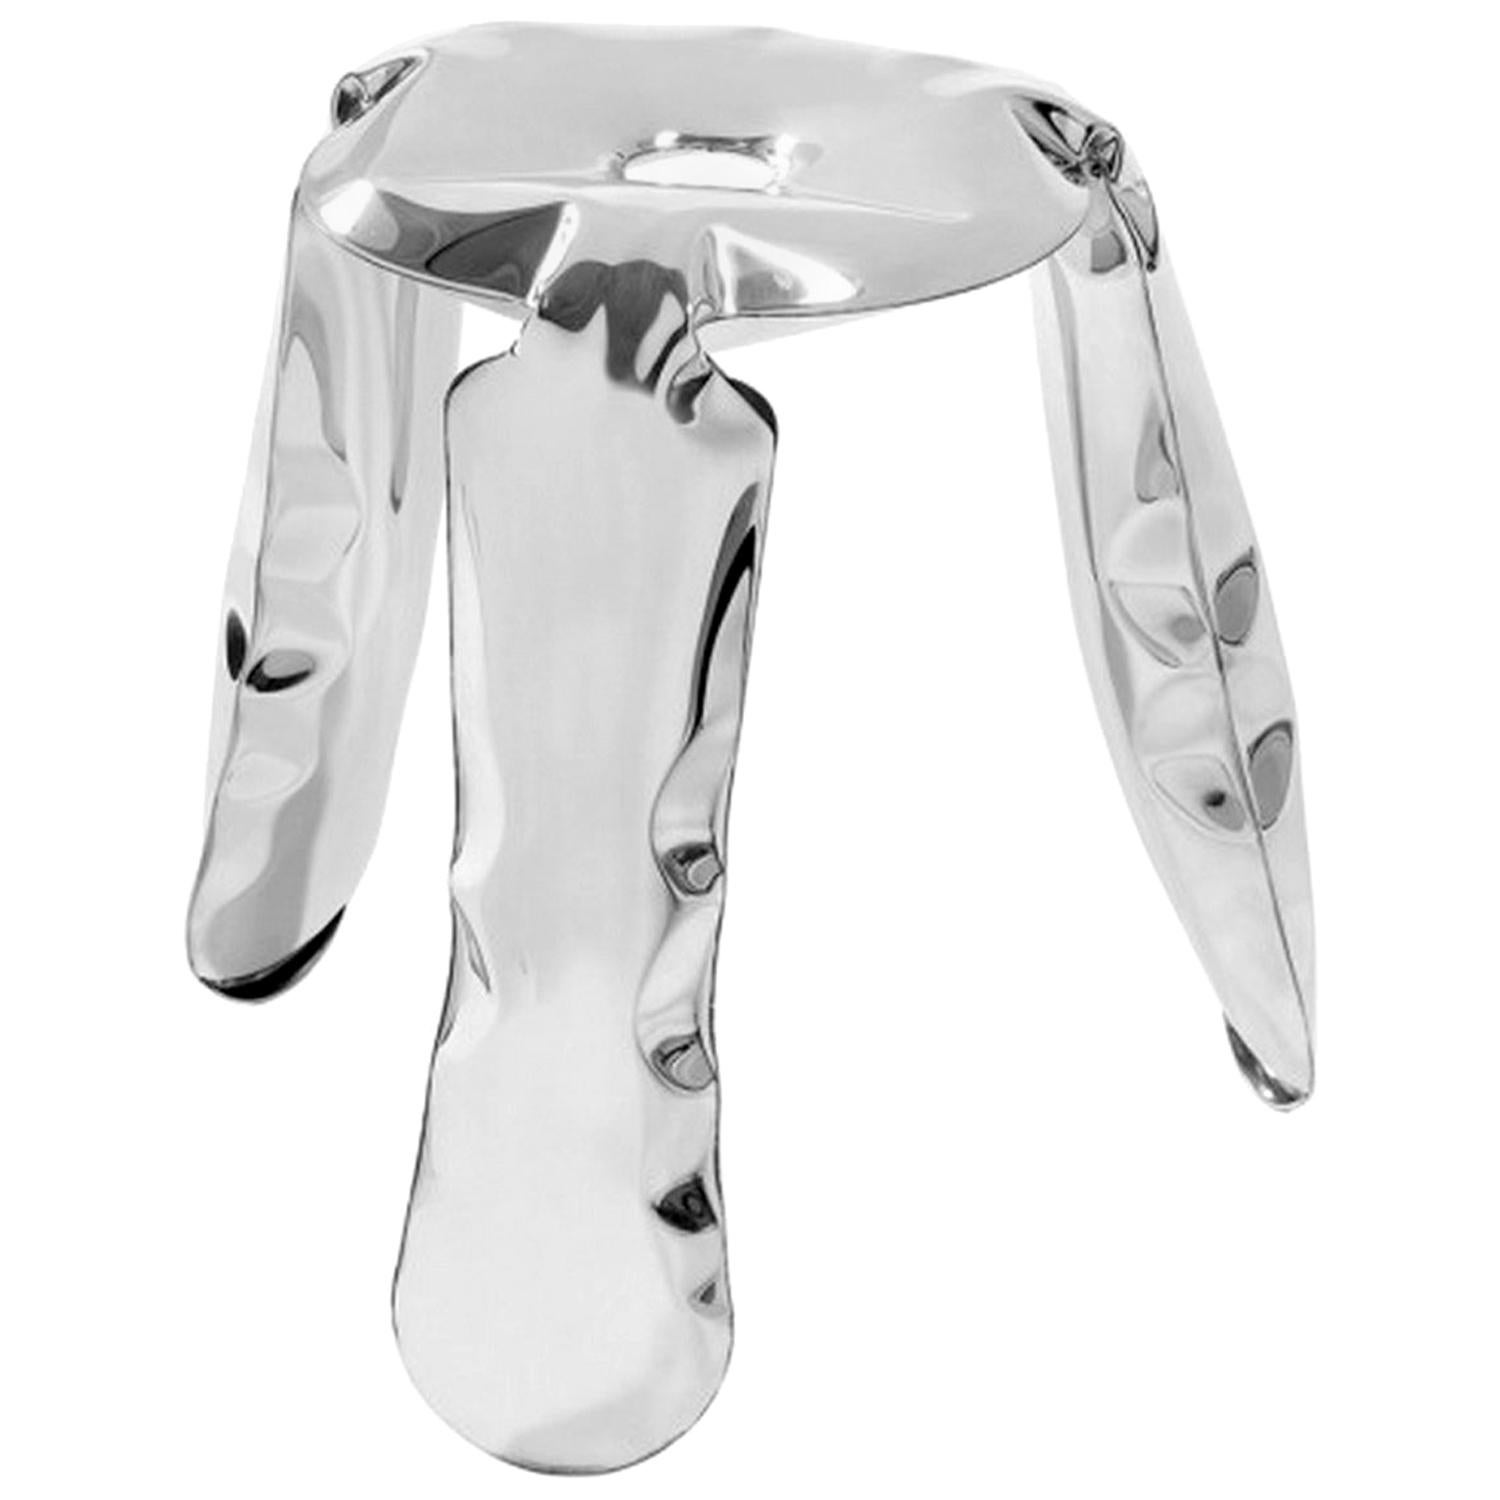 In Stock in Los Angeles, Limited Edition Counter Stool Polished Stainless Steel